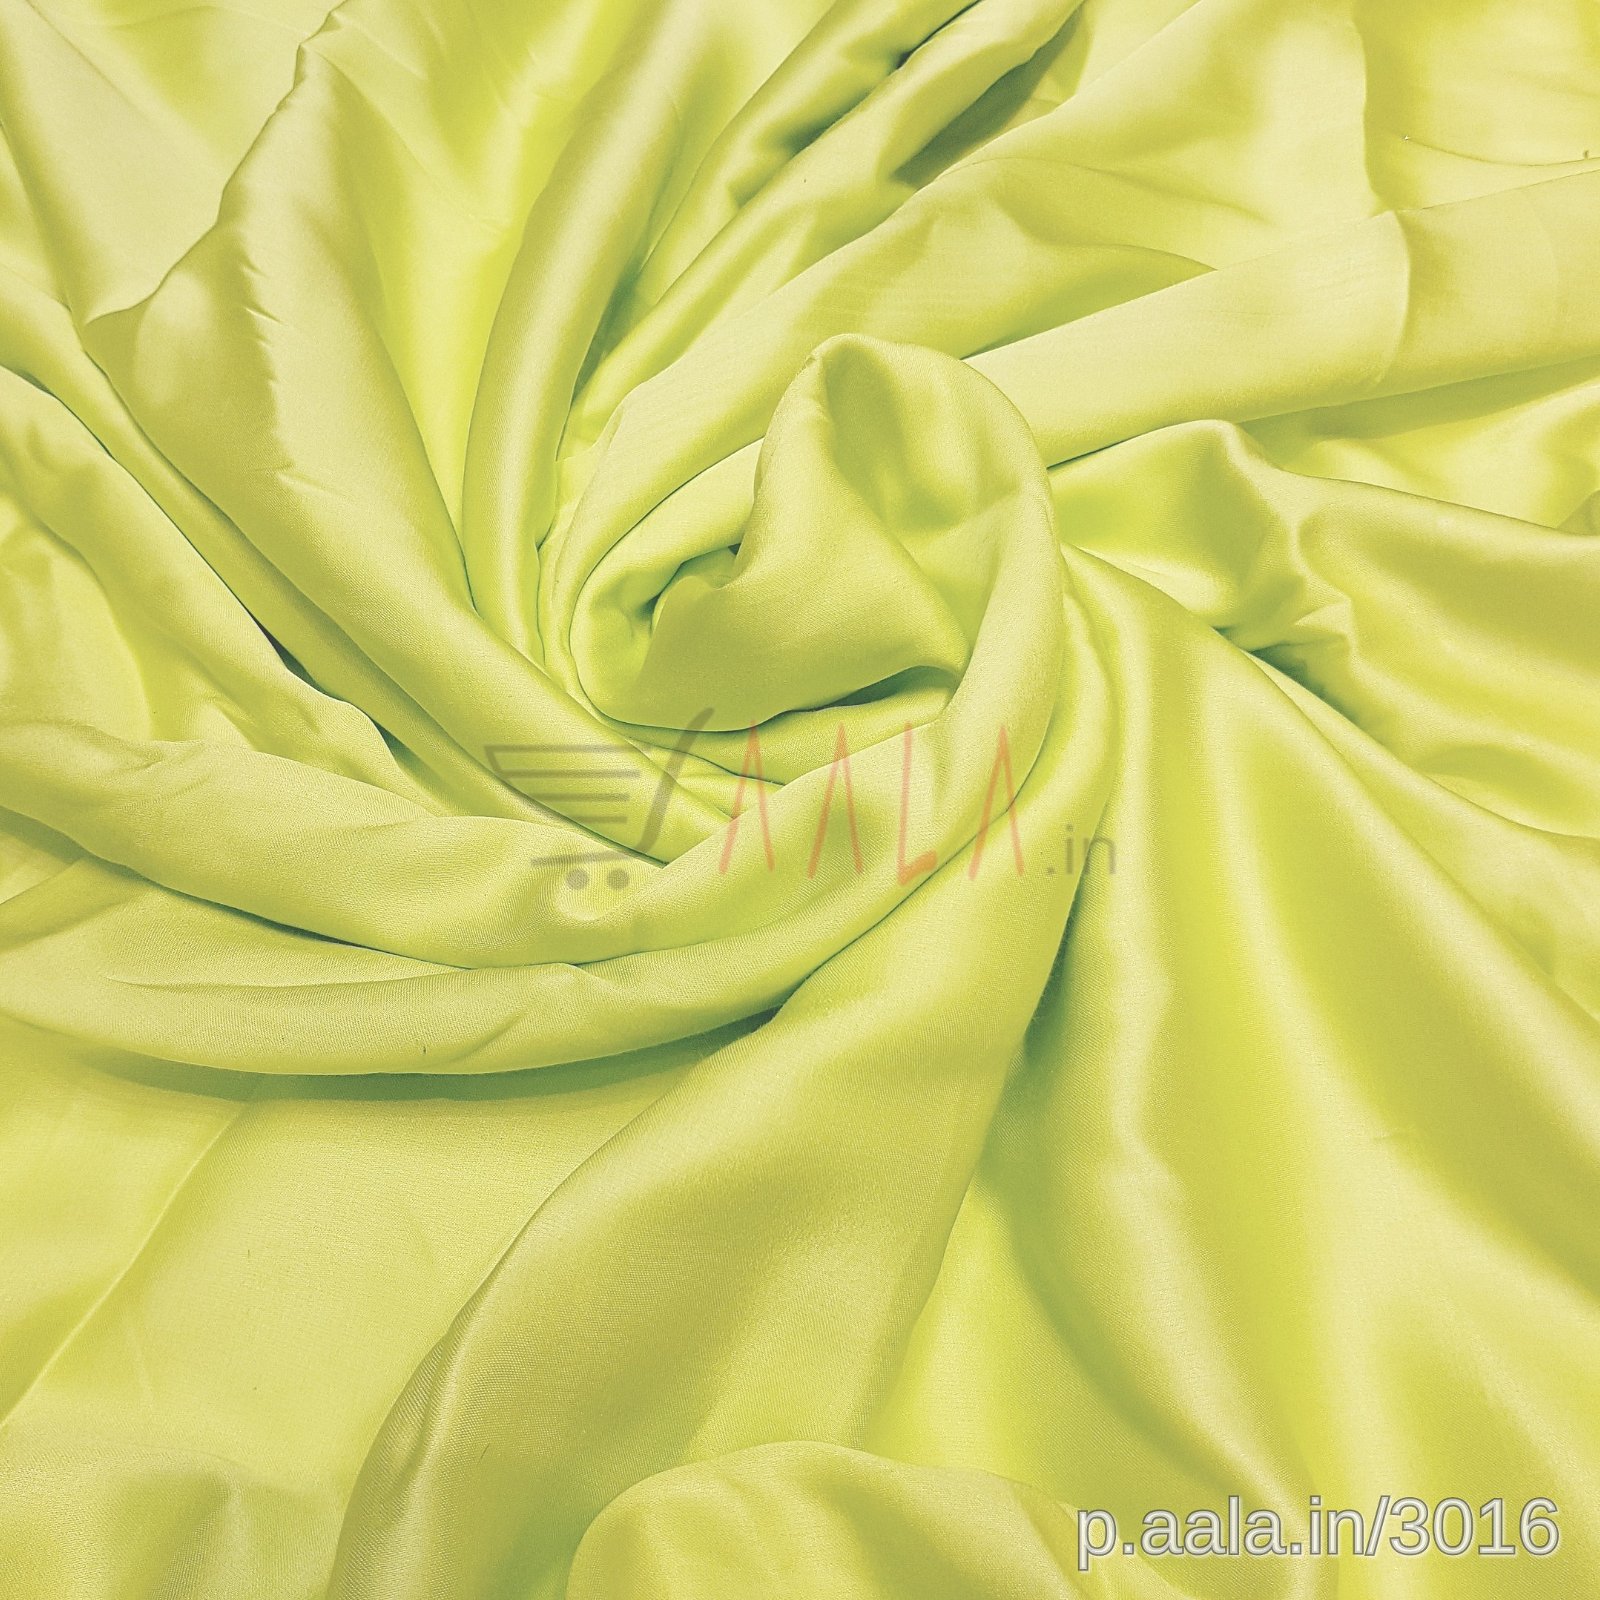 Modal Satin Viscose 44 Inches Dyed Per Metre #3016